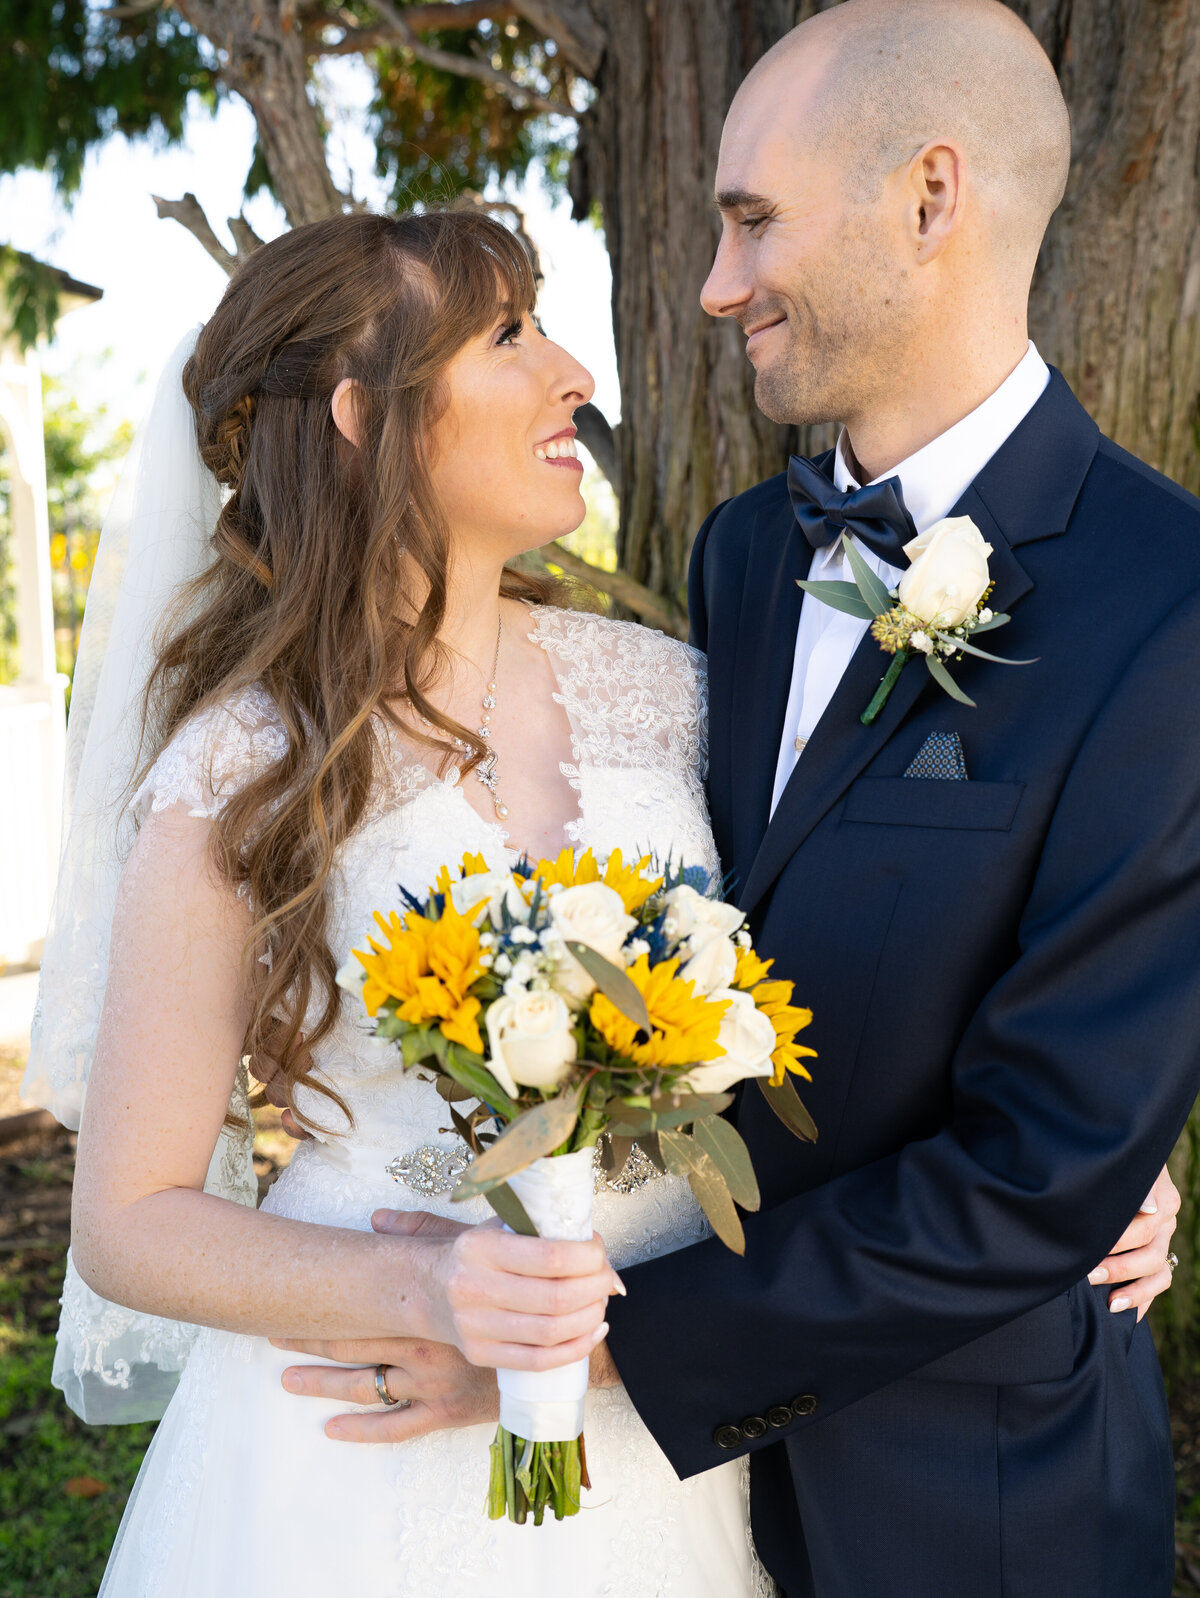 A bride with long red hair and lace cap sleeves holds a sunflower bouquet in one hand wraps her other arm around her groom as he pulls her close and they face each other with a sweet smile. Photo by SAVI Photography - Los Angeles CA Photographer